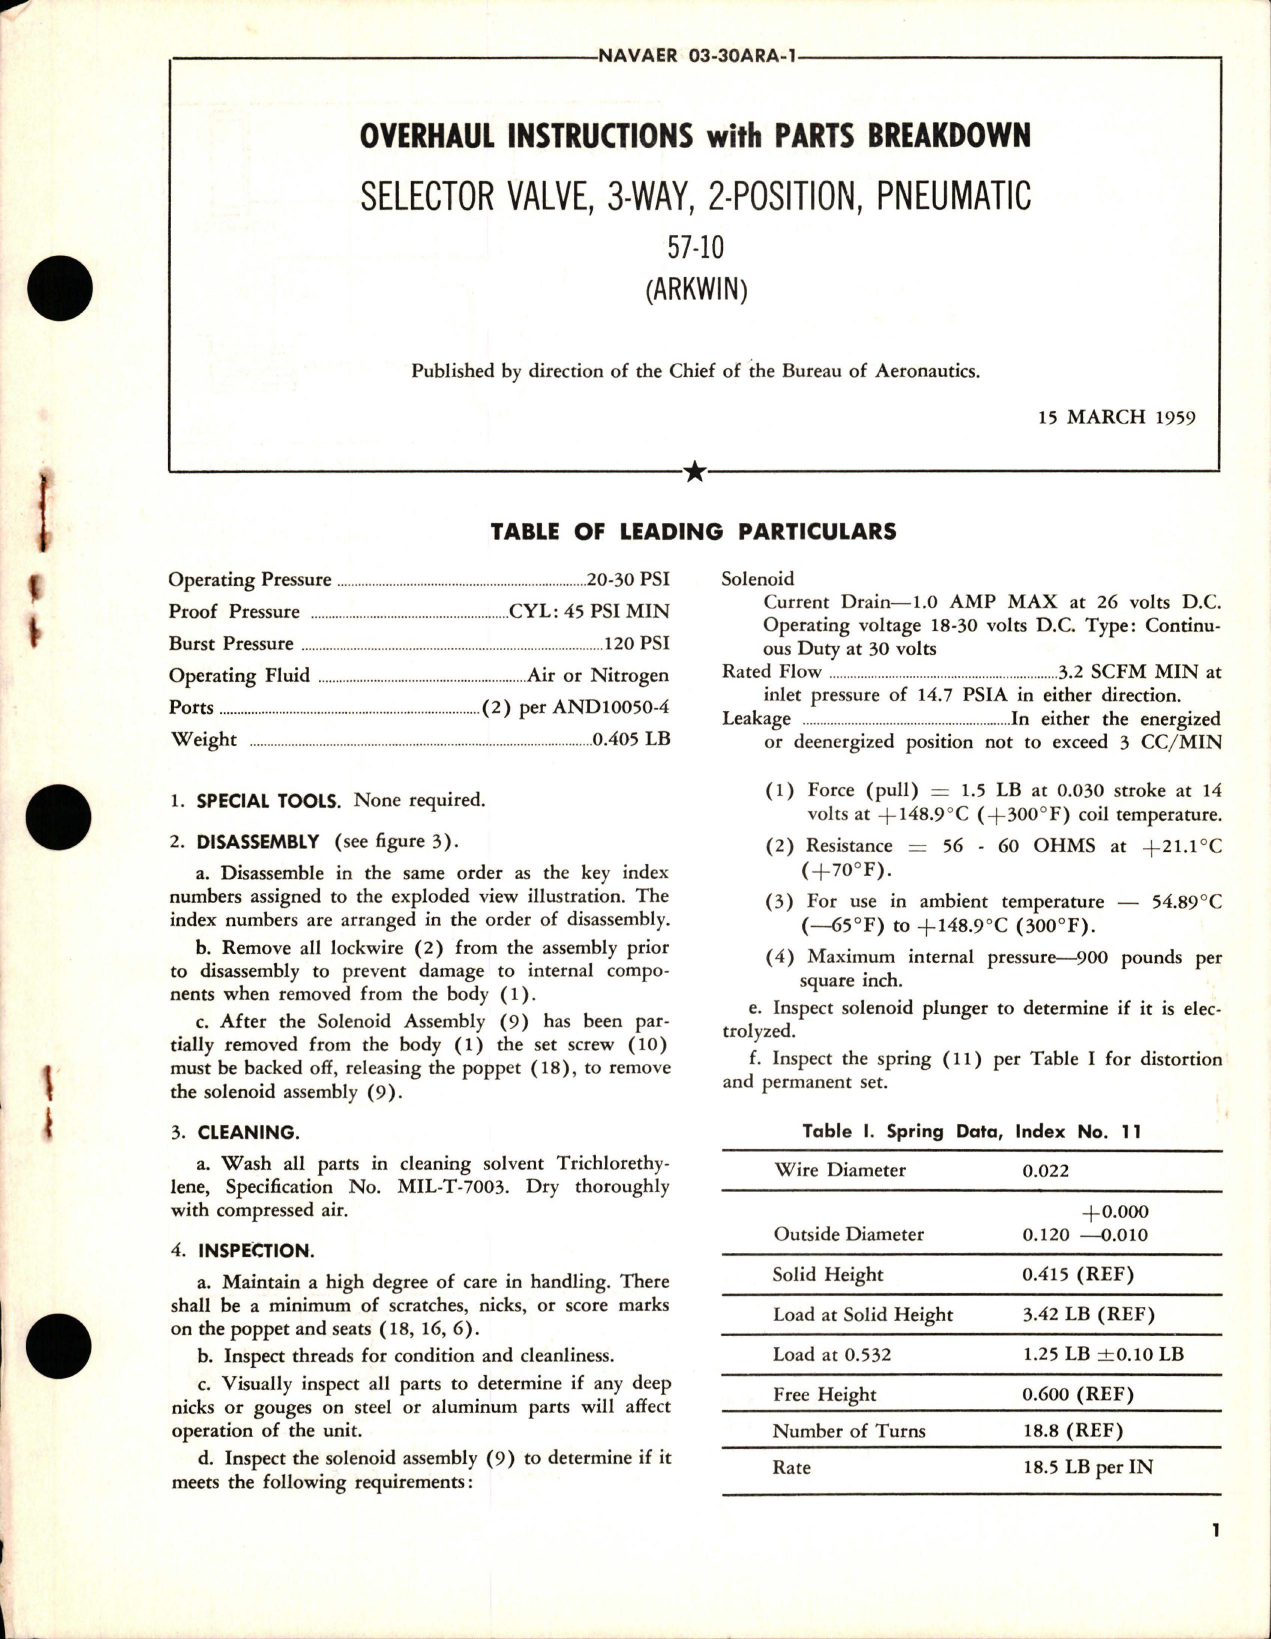 Sample page 1 from AirCorps Library document: Overhaul Instructions with Parts Breakdown for 3-Way 2-Position Pneumatic Selector Valve - 57-10